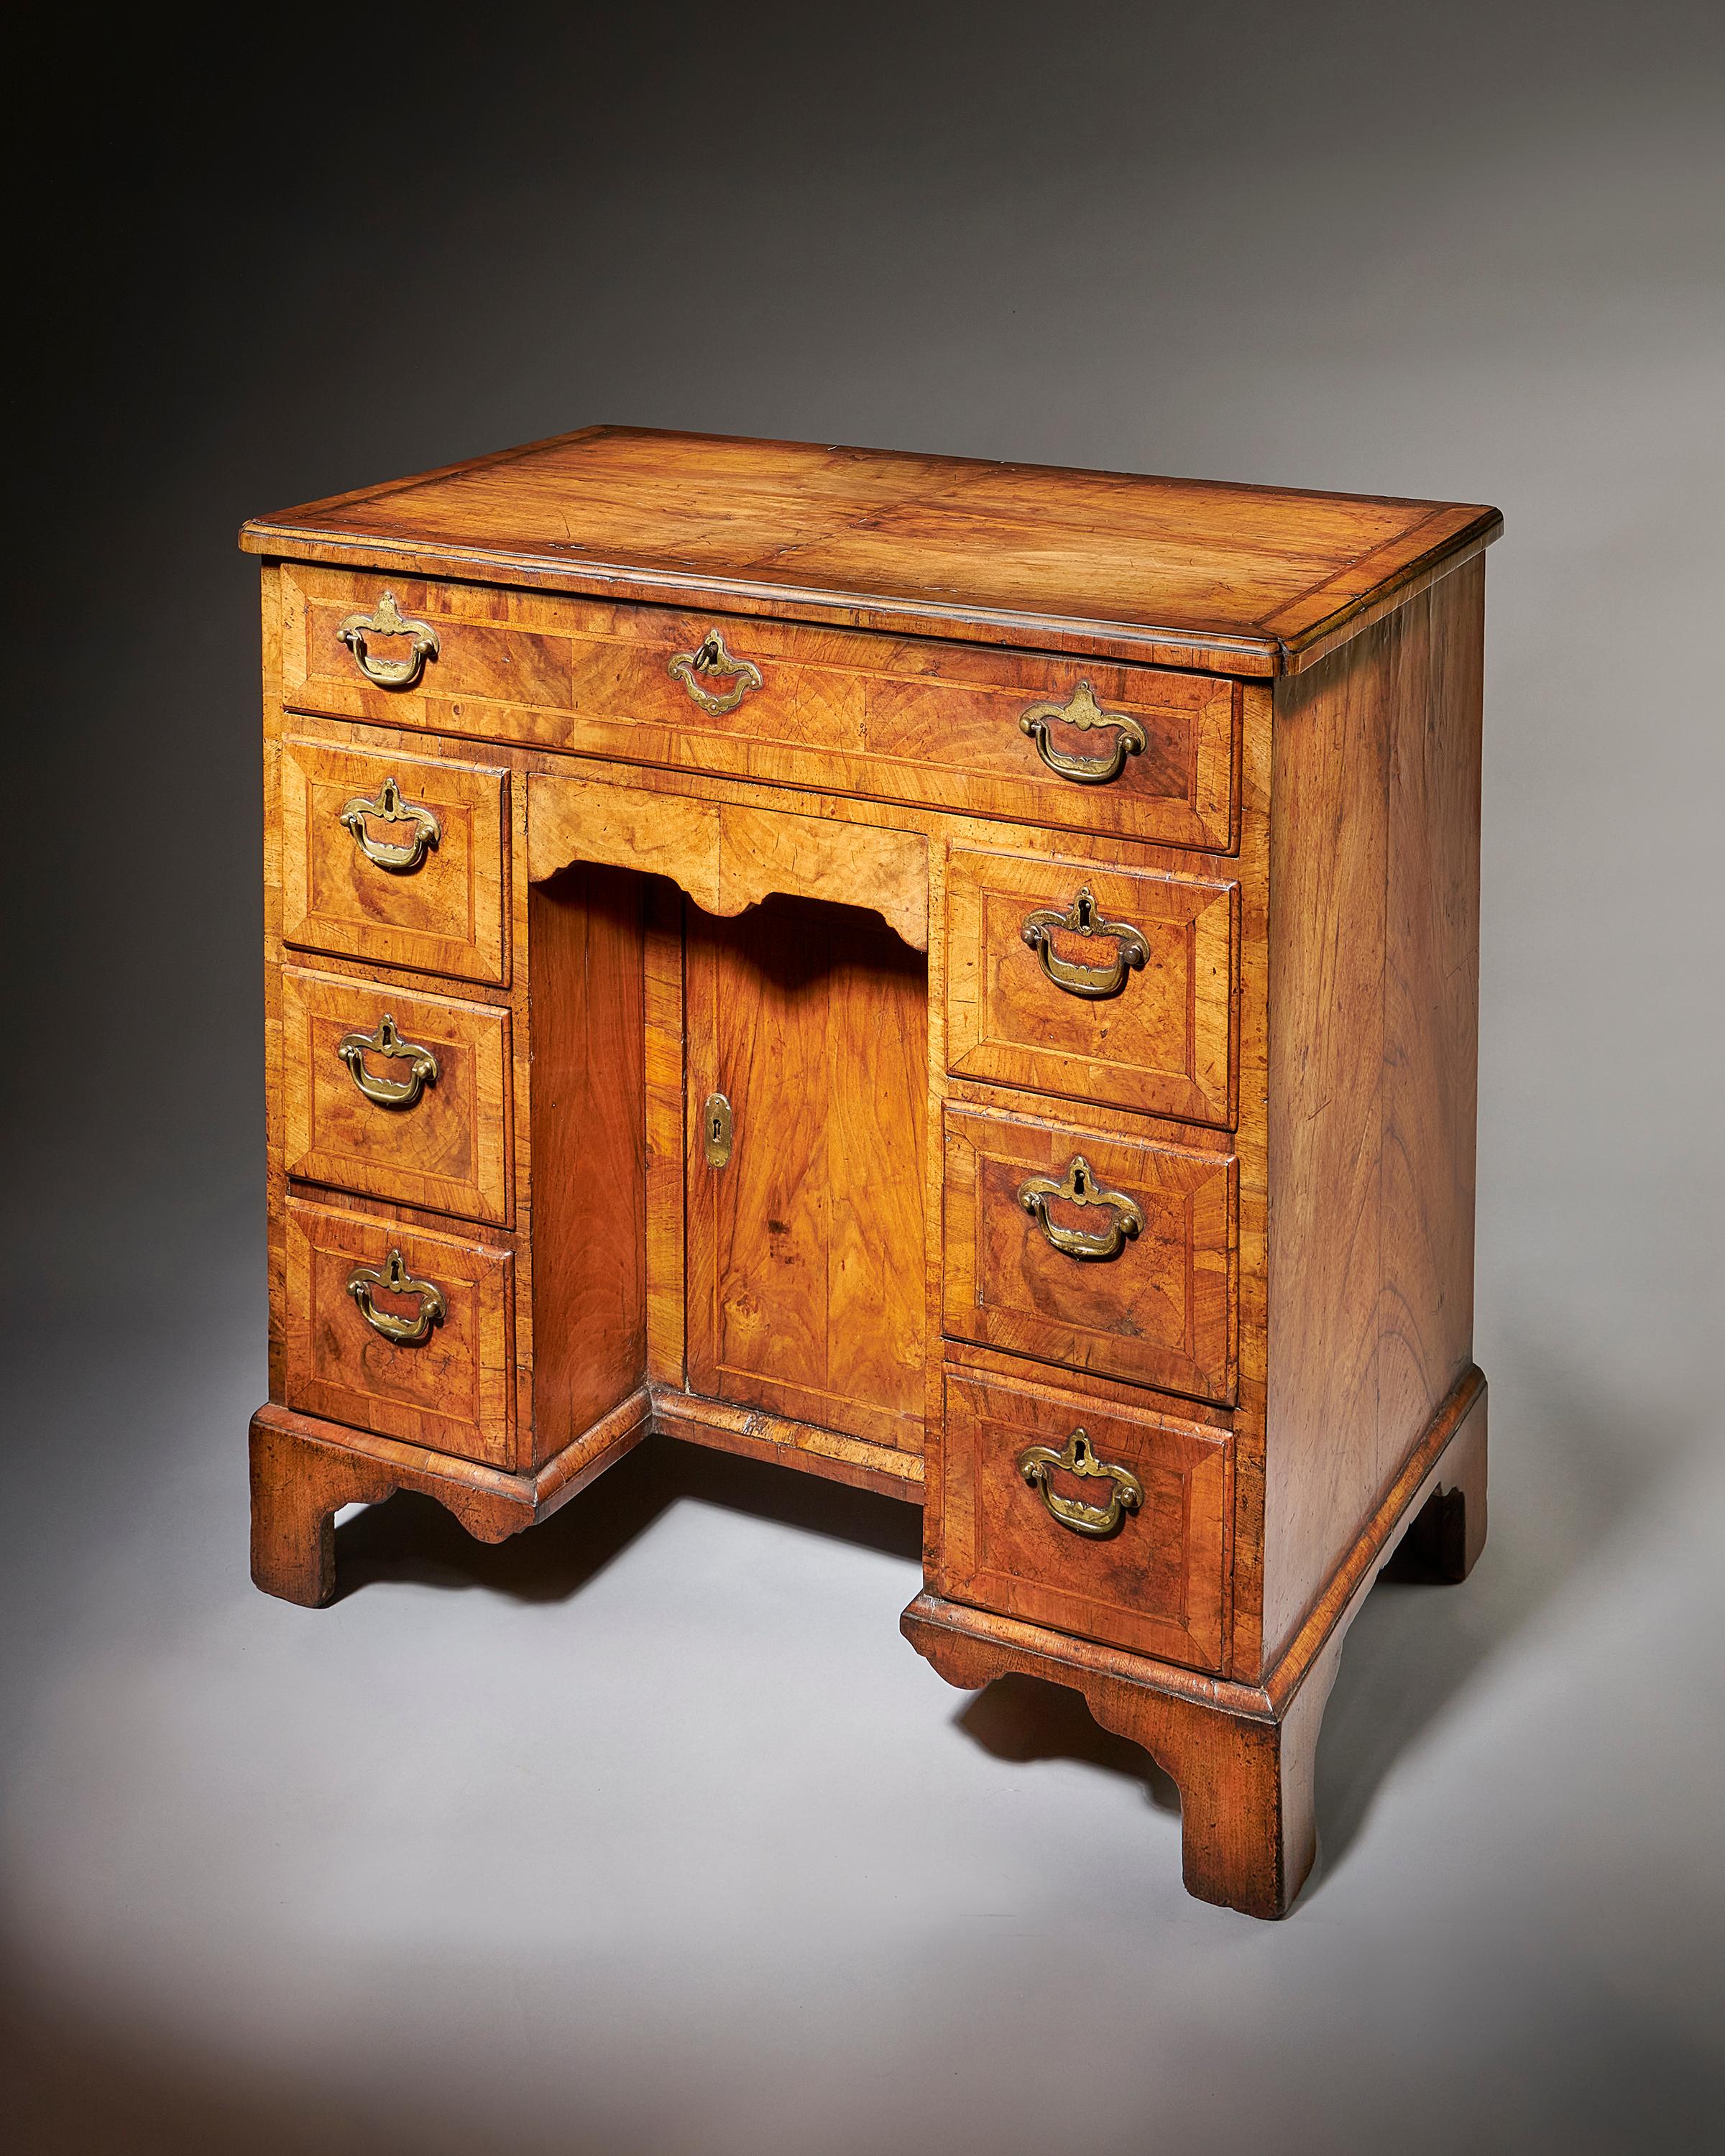 A fine George II figured walnut kneehole desk attributed to Elizabeth Bell & Sons, 1740-1758.

The superb quarter veneered figured walnut top is bordered by a fine feather stringing, cross-banded and edged with cross-grain ovolo mouldings on